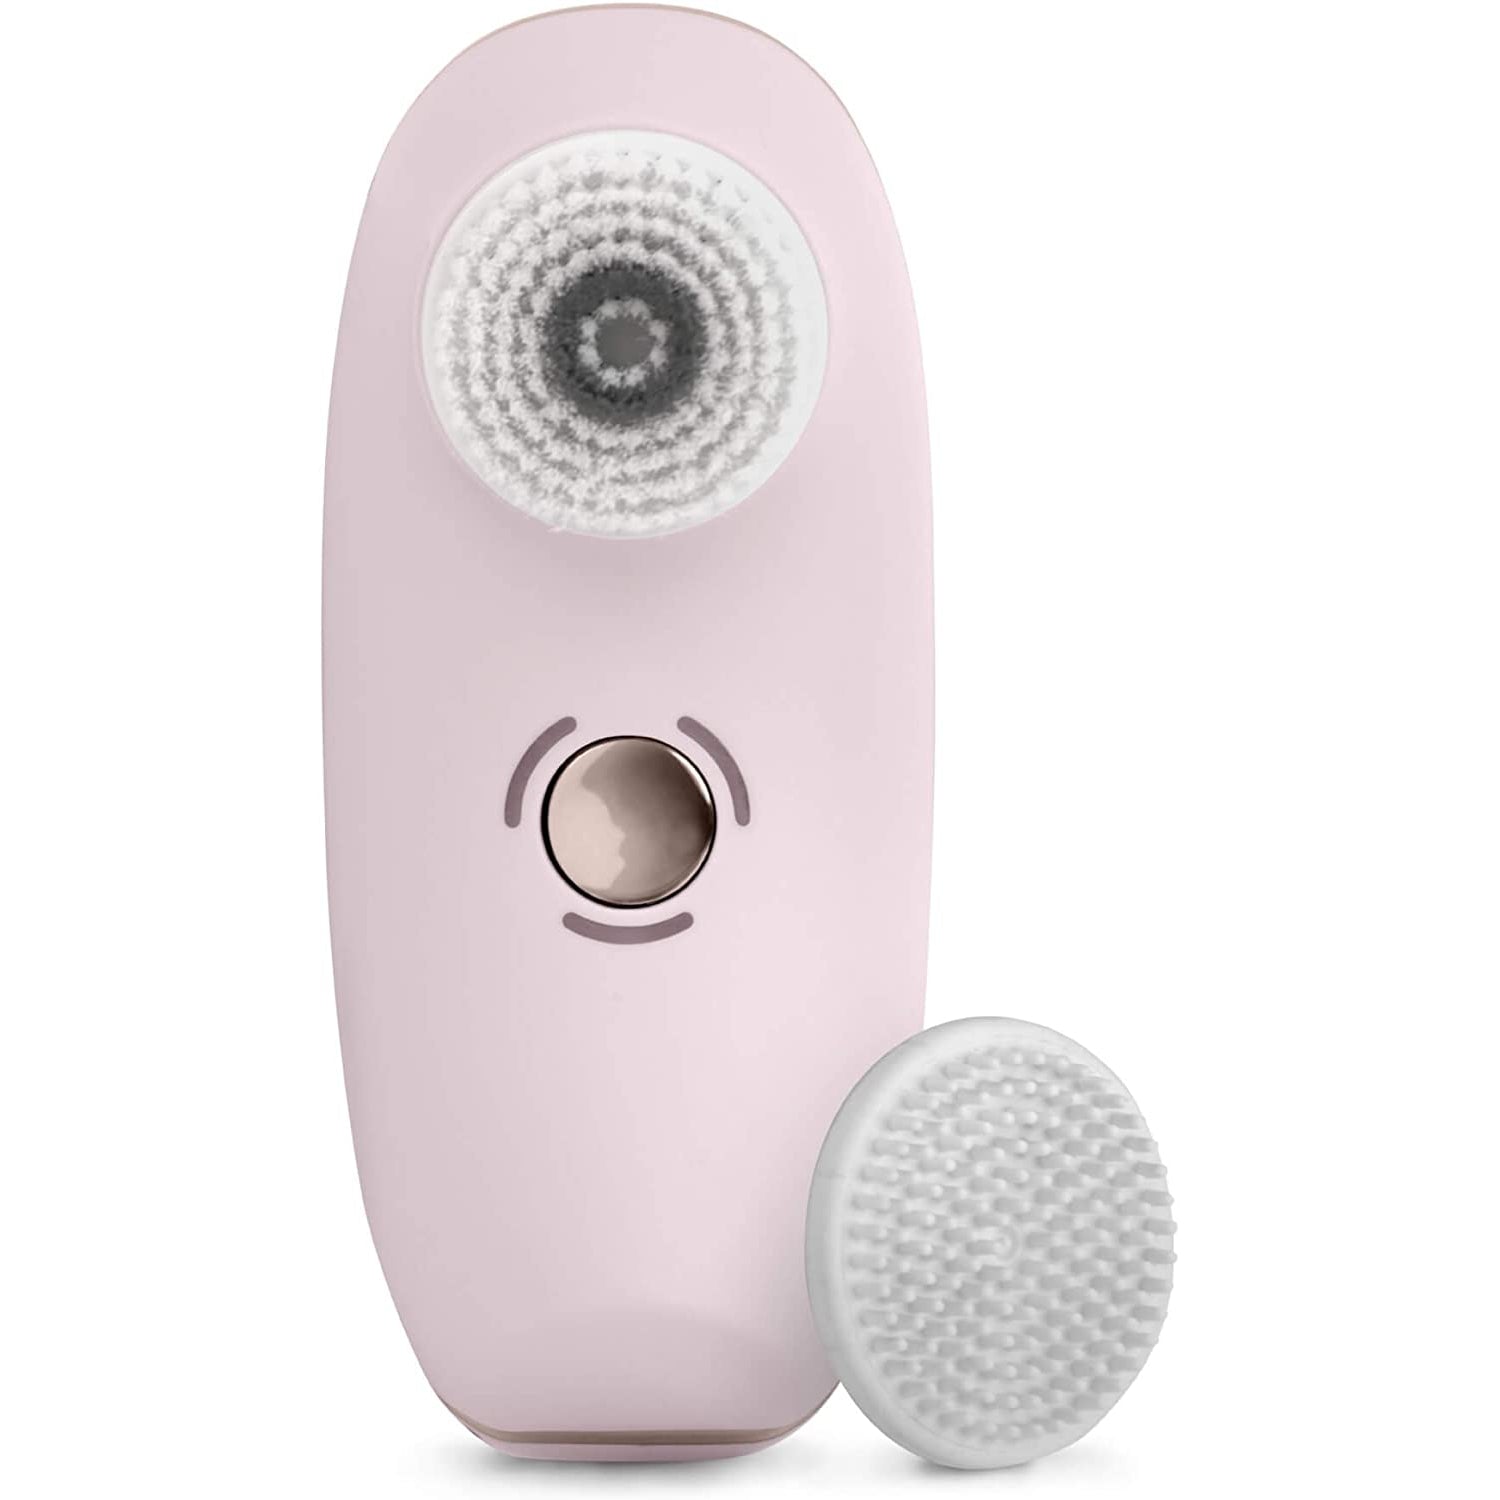 Magnitone BareFaced 2 Vibra Sonic Face Cleansing and Massaging Brush - Refurbished Pristine